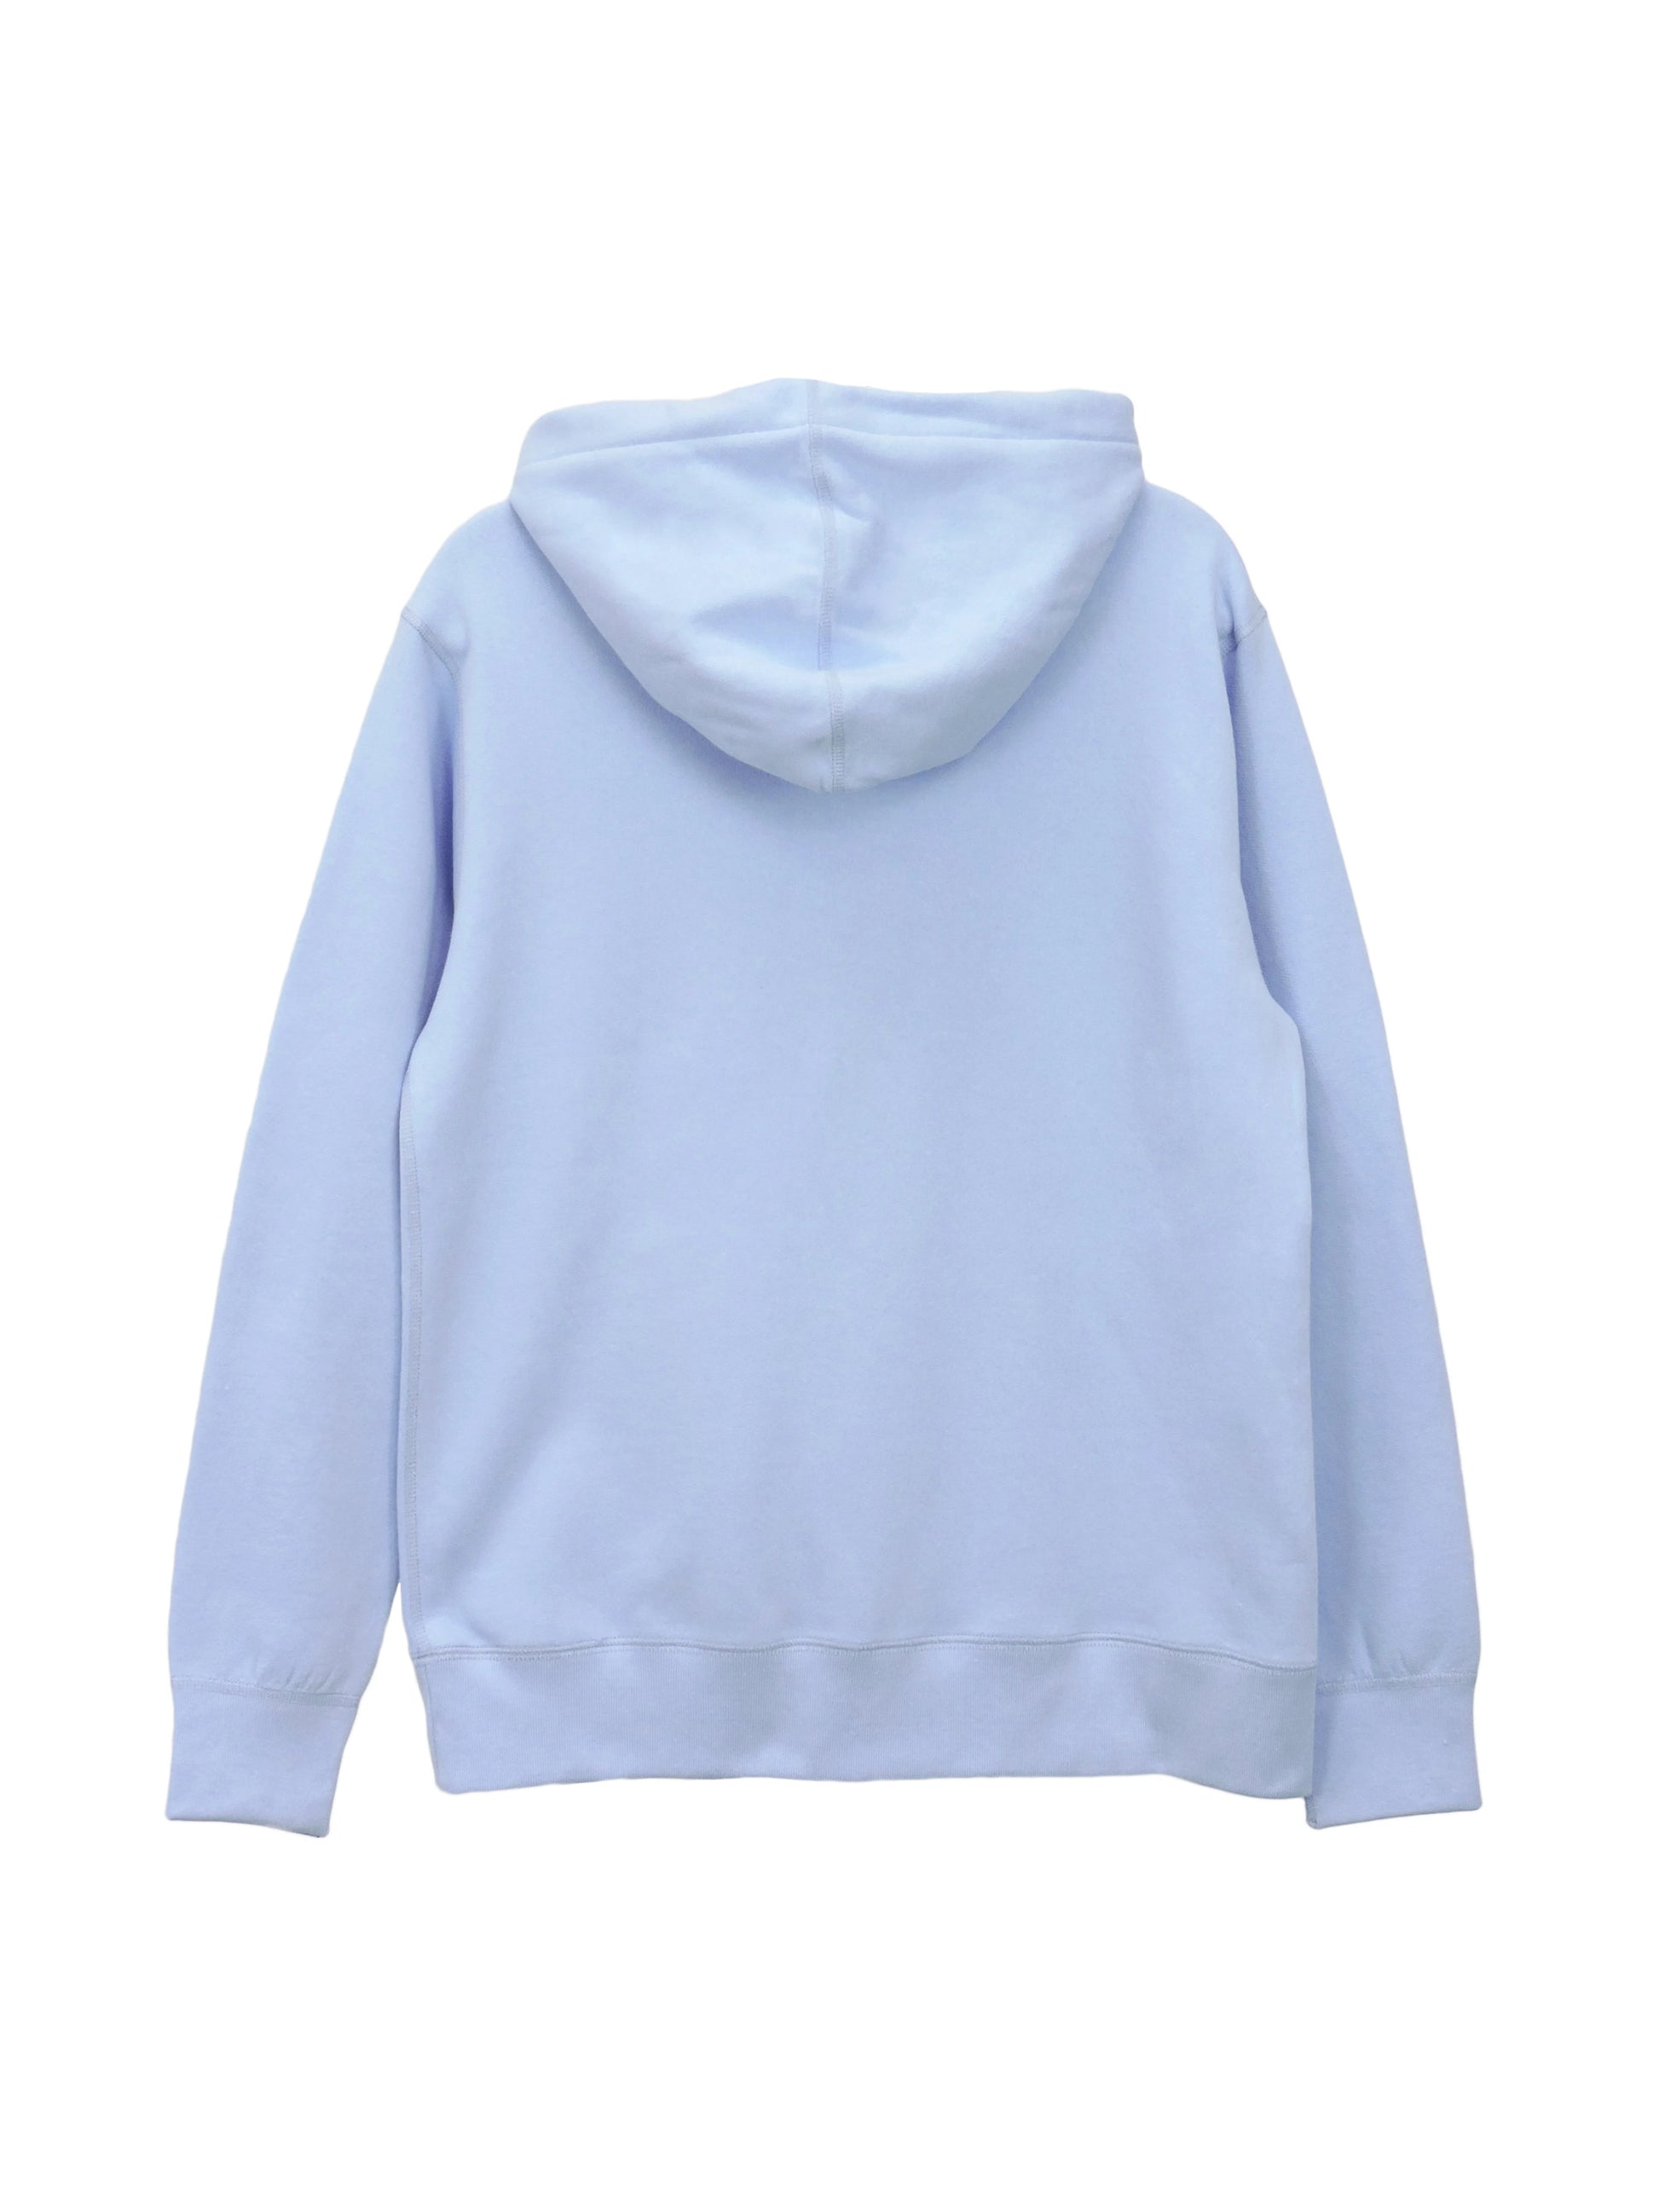 Back of clothing blank hoodie in airy blue, ribbed cuffs and waistband